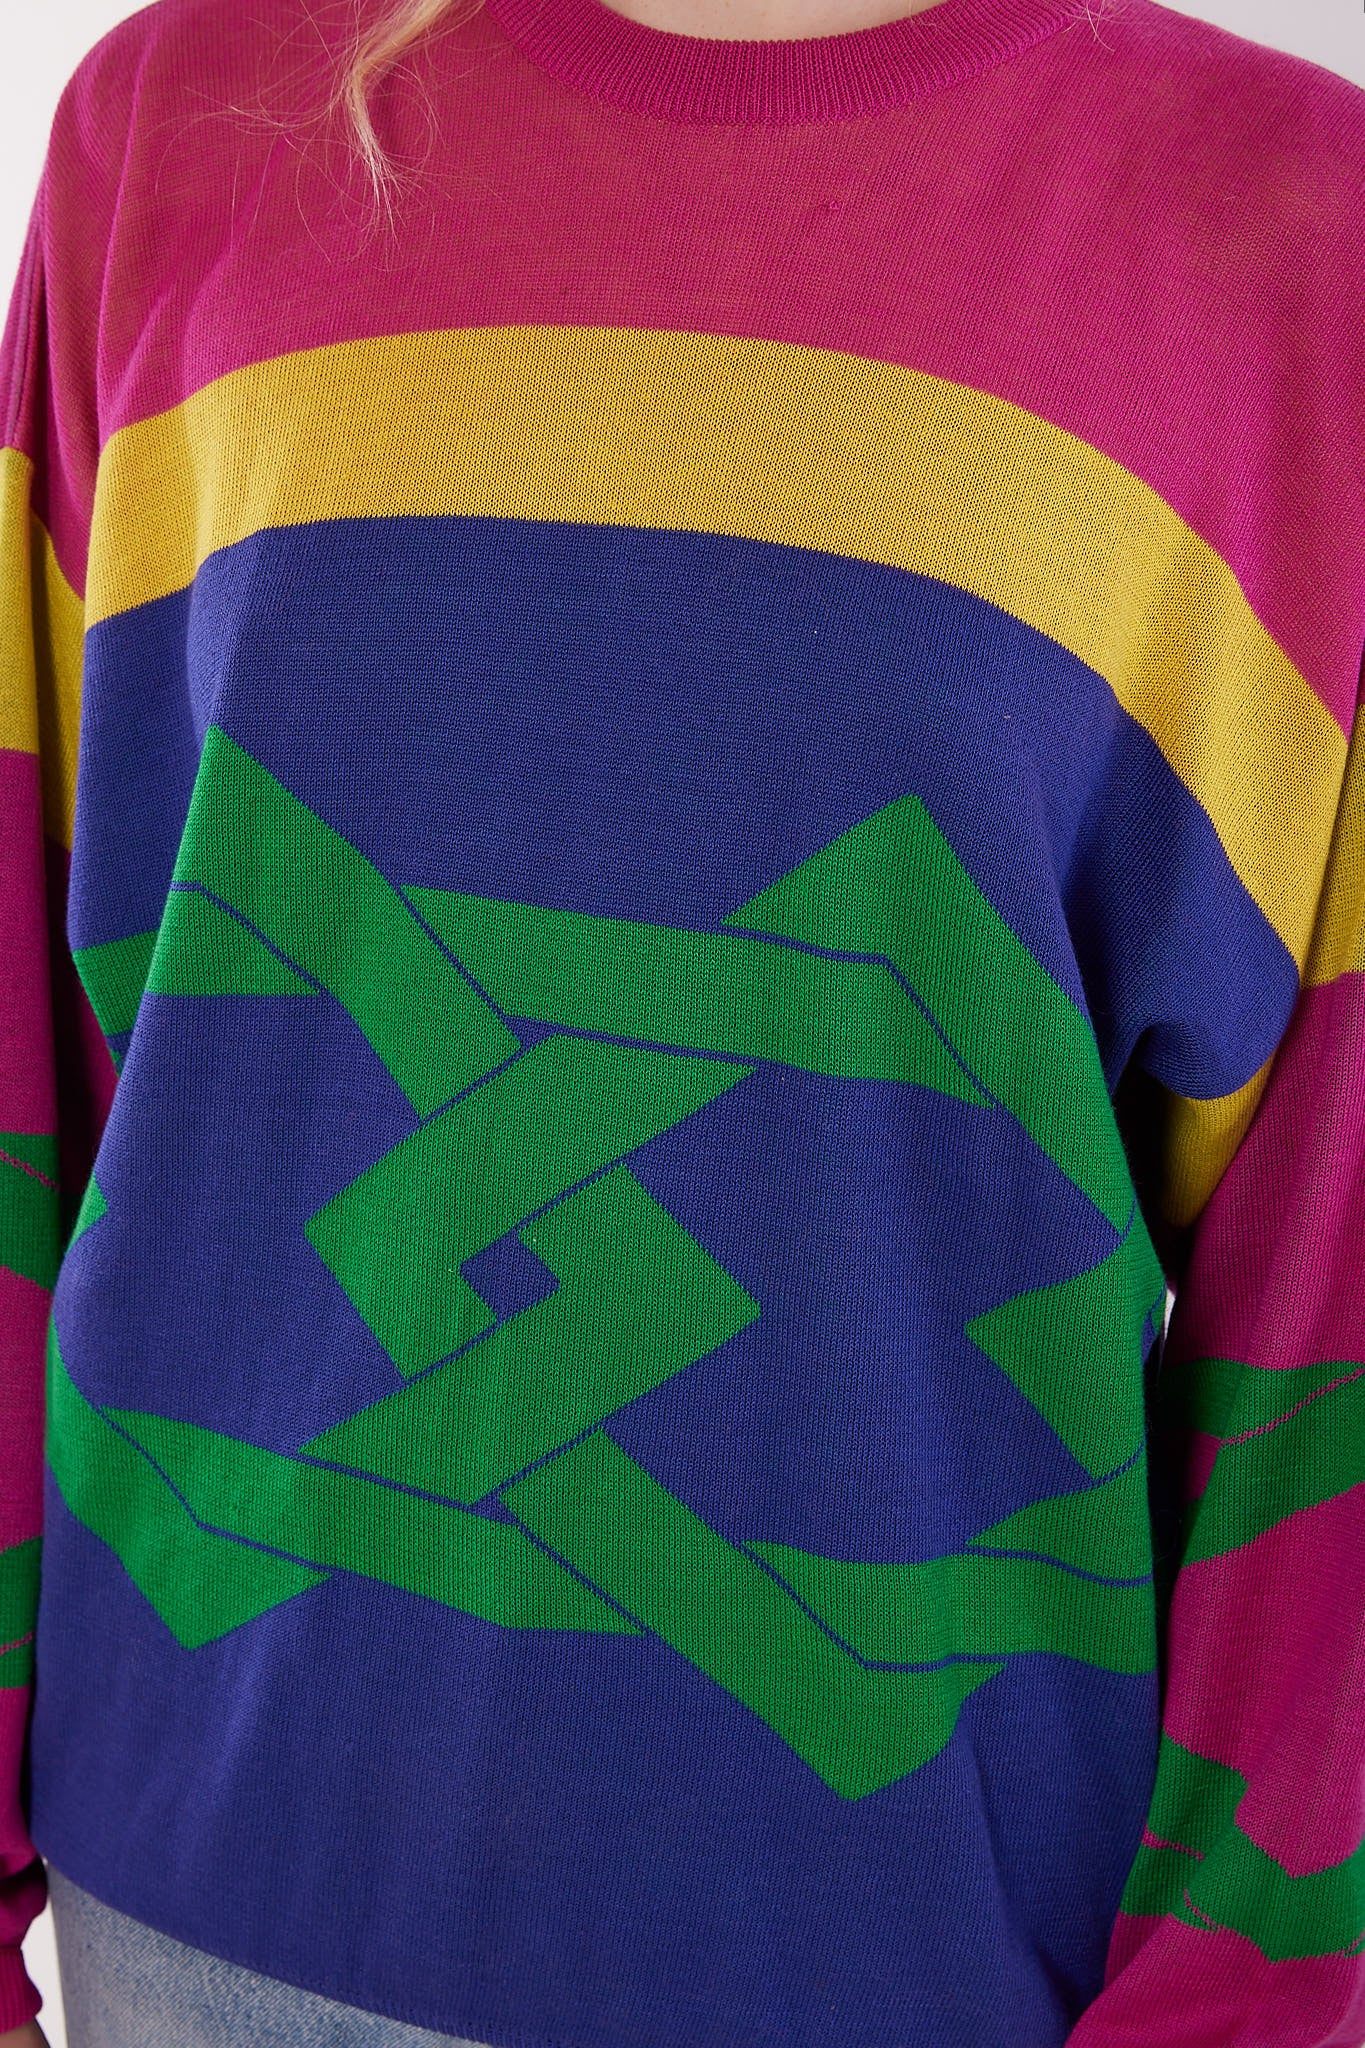 Gianni Versace <br> 90's graphic pattern knit sweater